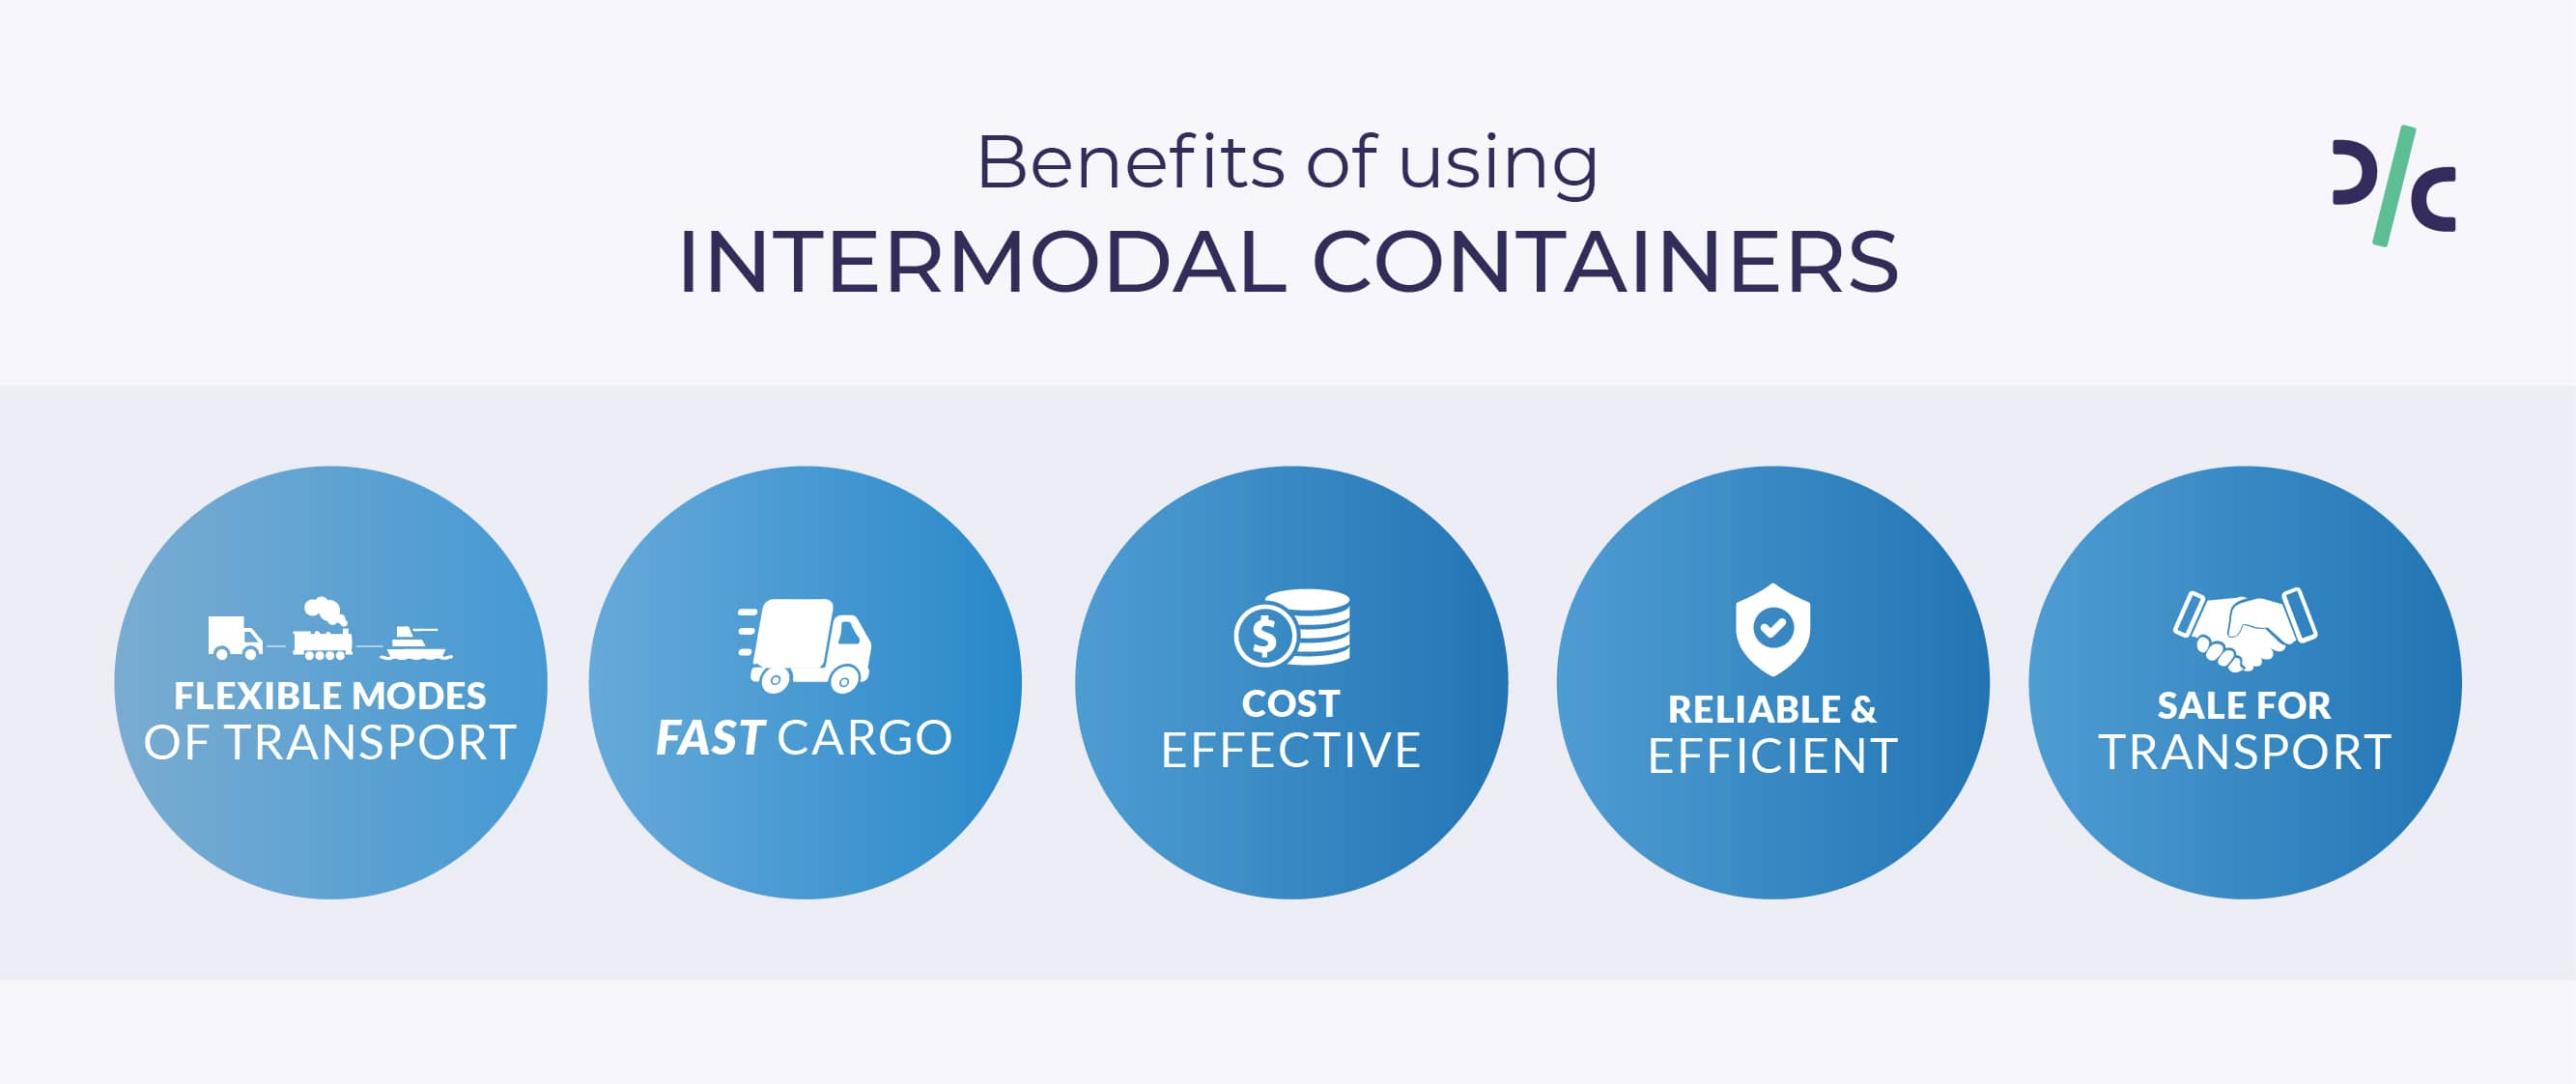 https://images.contentful.com/vkoe68wv76dt/5RxYHQsYiQJReruHBGaOaH/8f83dfb68dfff0e00a1d5592a0c9924b/Benefits_of_Intermodal_Container_Blog__1_.jpg